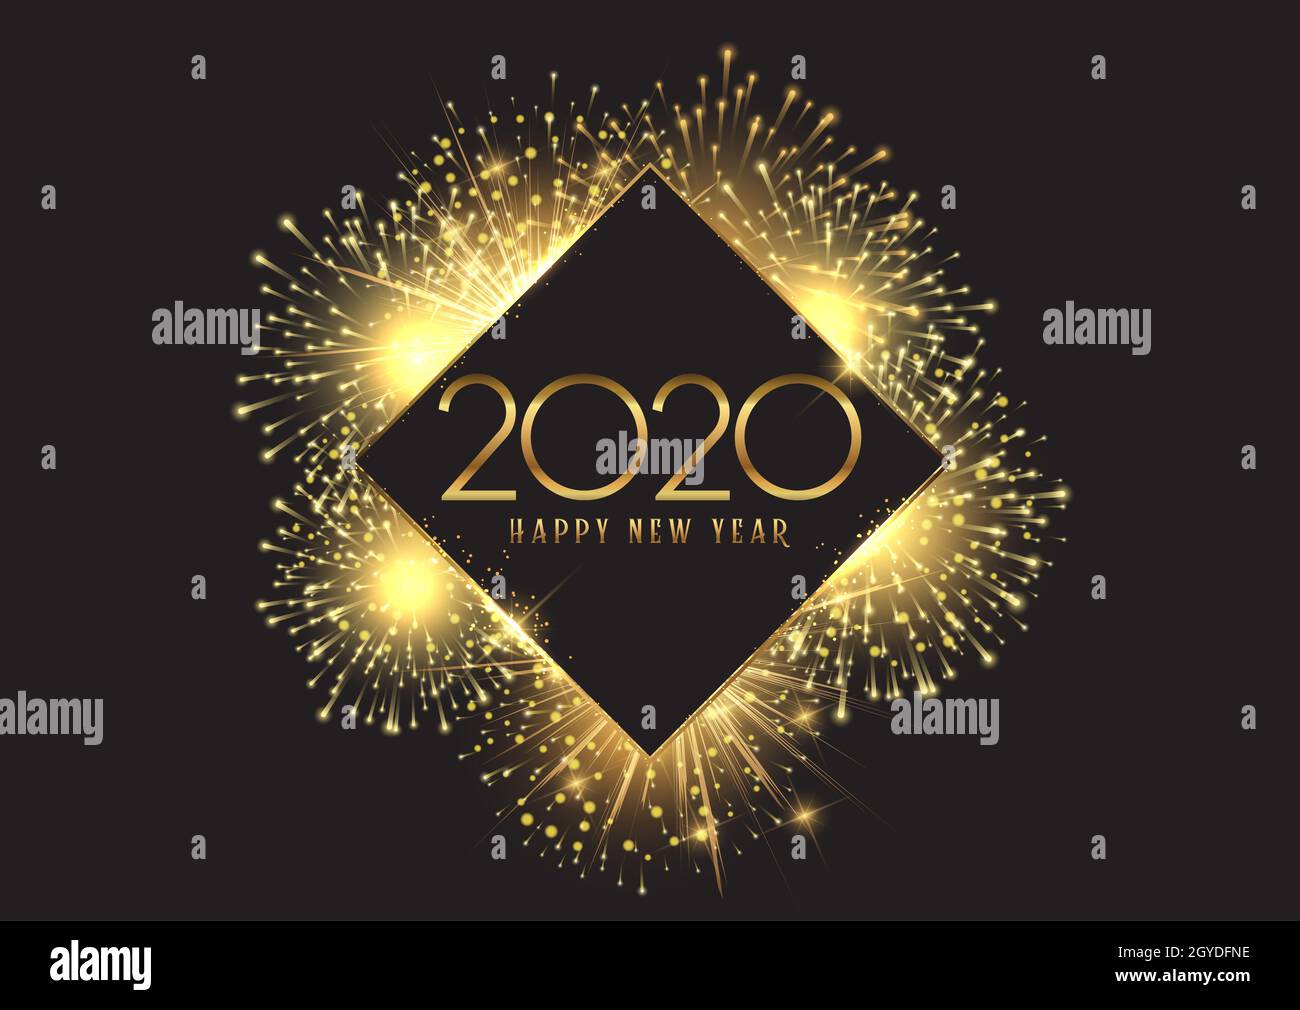 Happy New Year background with a golden fireworks design Stock Photo